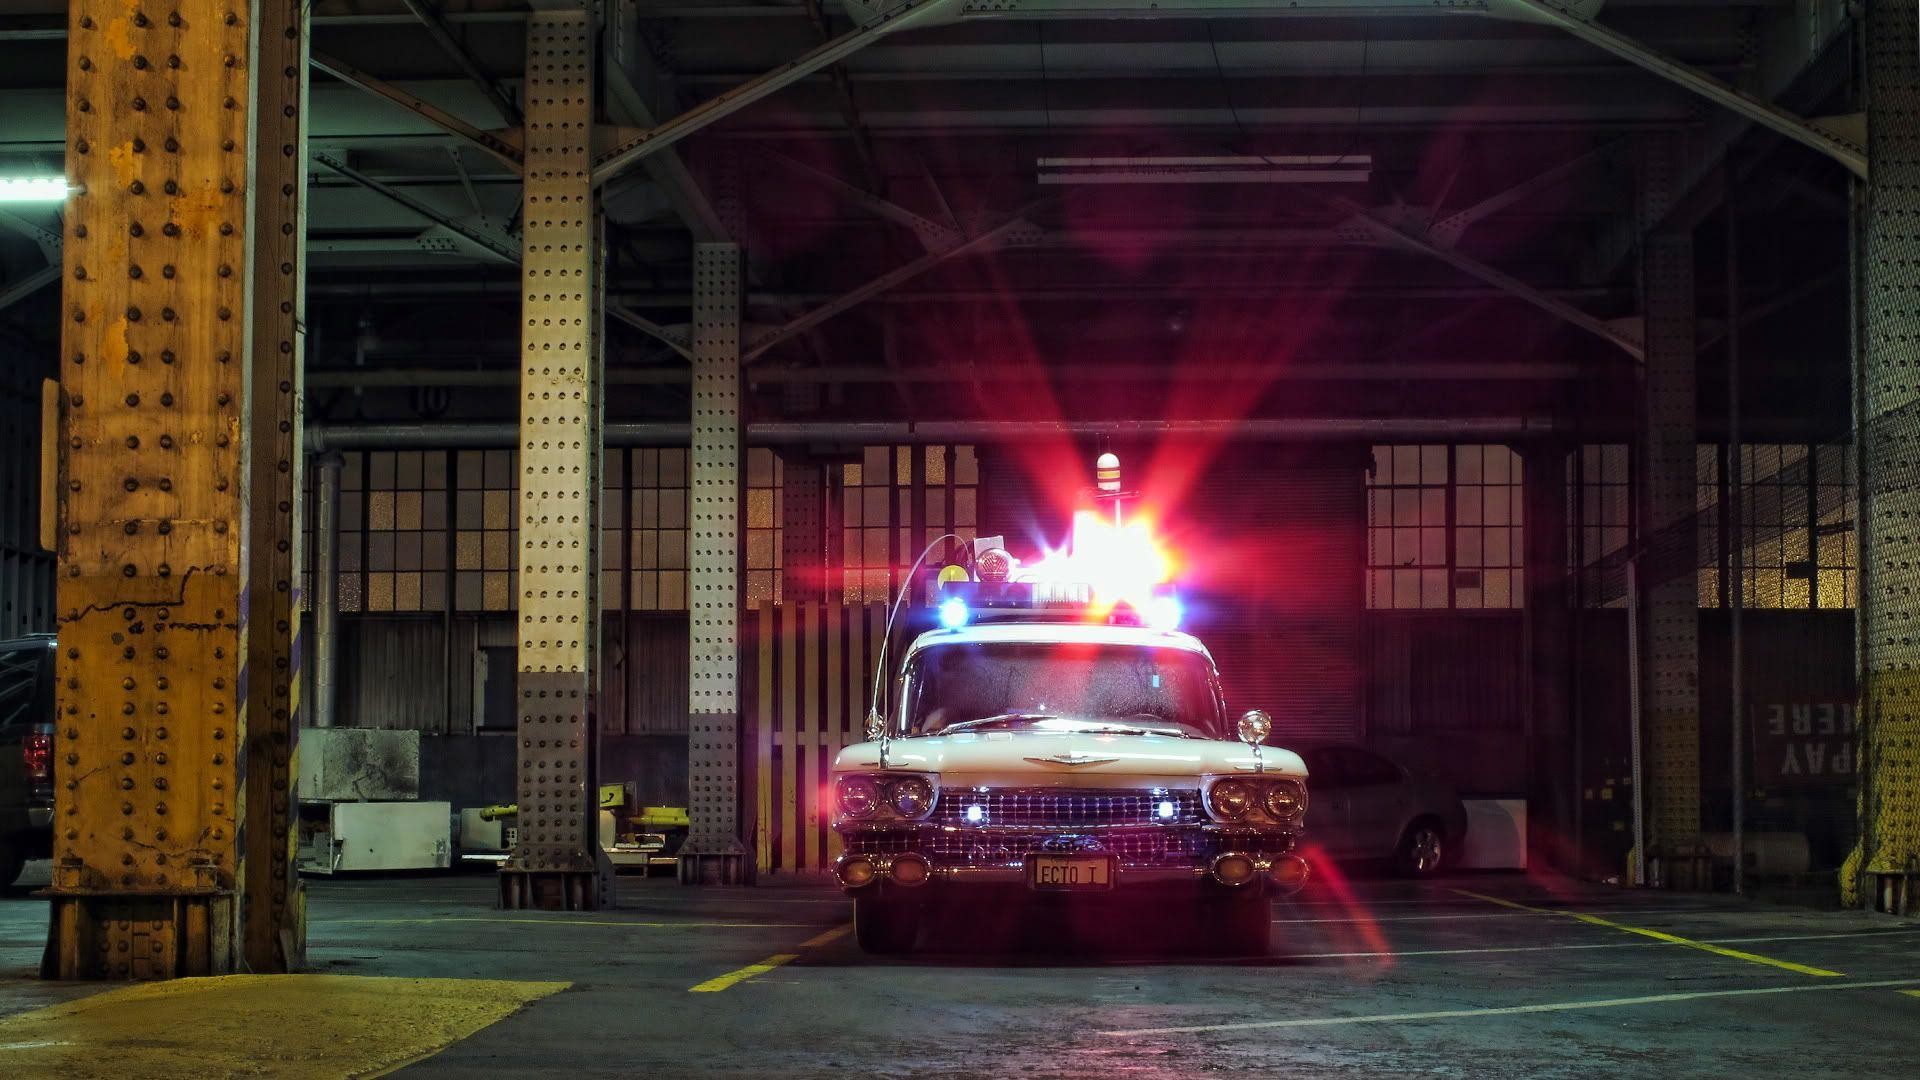 1920x1080 High-Resolution Ecto-1 Wallpapers - Ghostbusters Fans